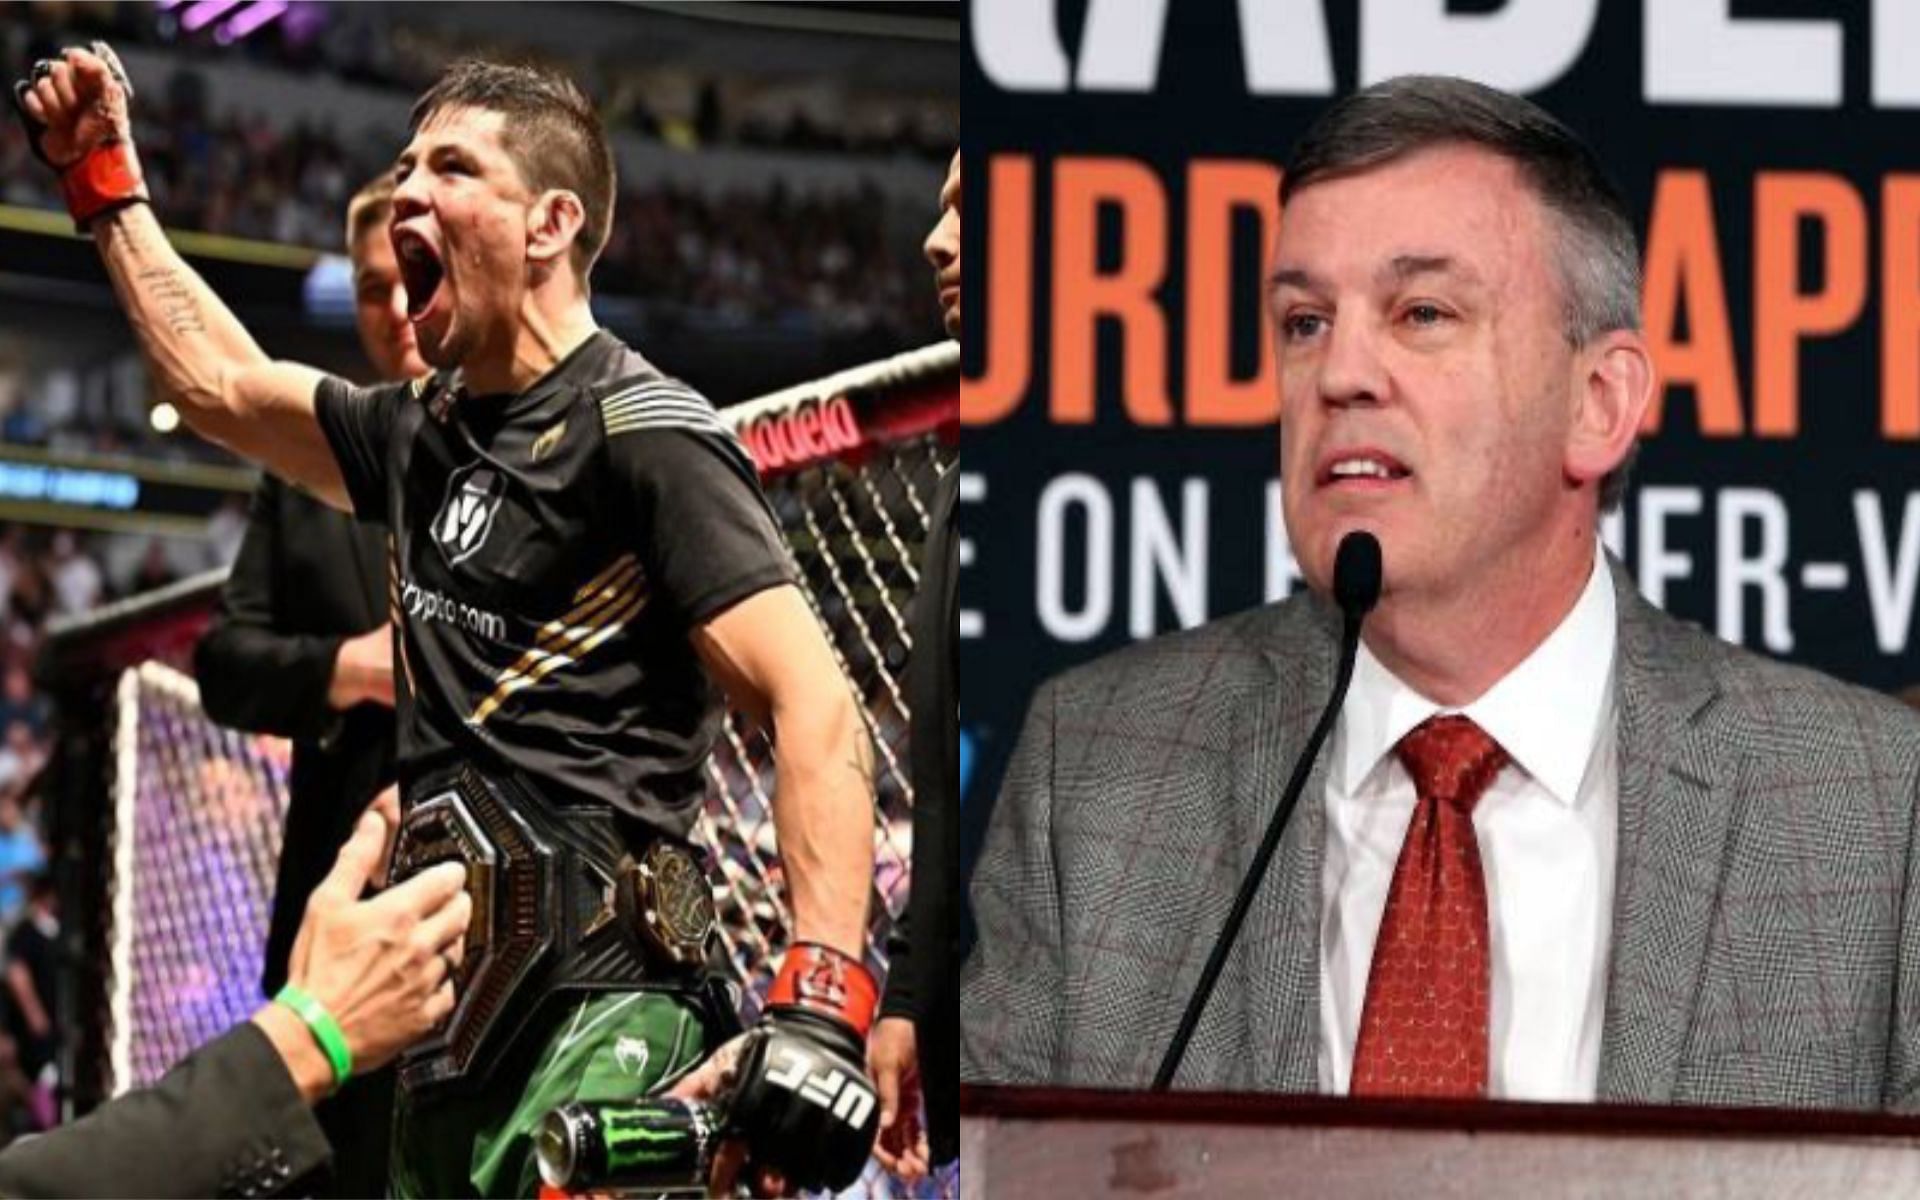 Brandon Moreno (left) and Teddy Atlas (right) [Images Courtesy: @theassassinbaby on Instagram and Chris Farina]